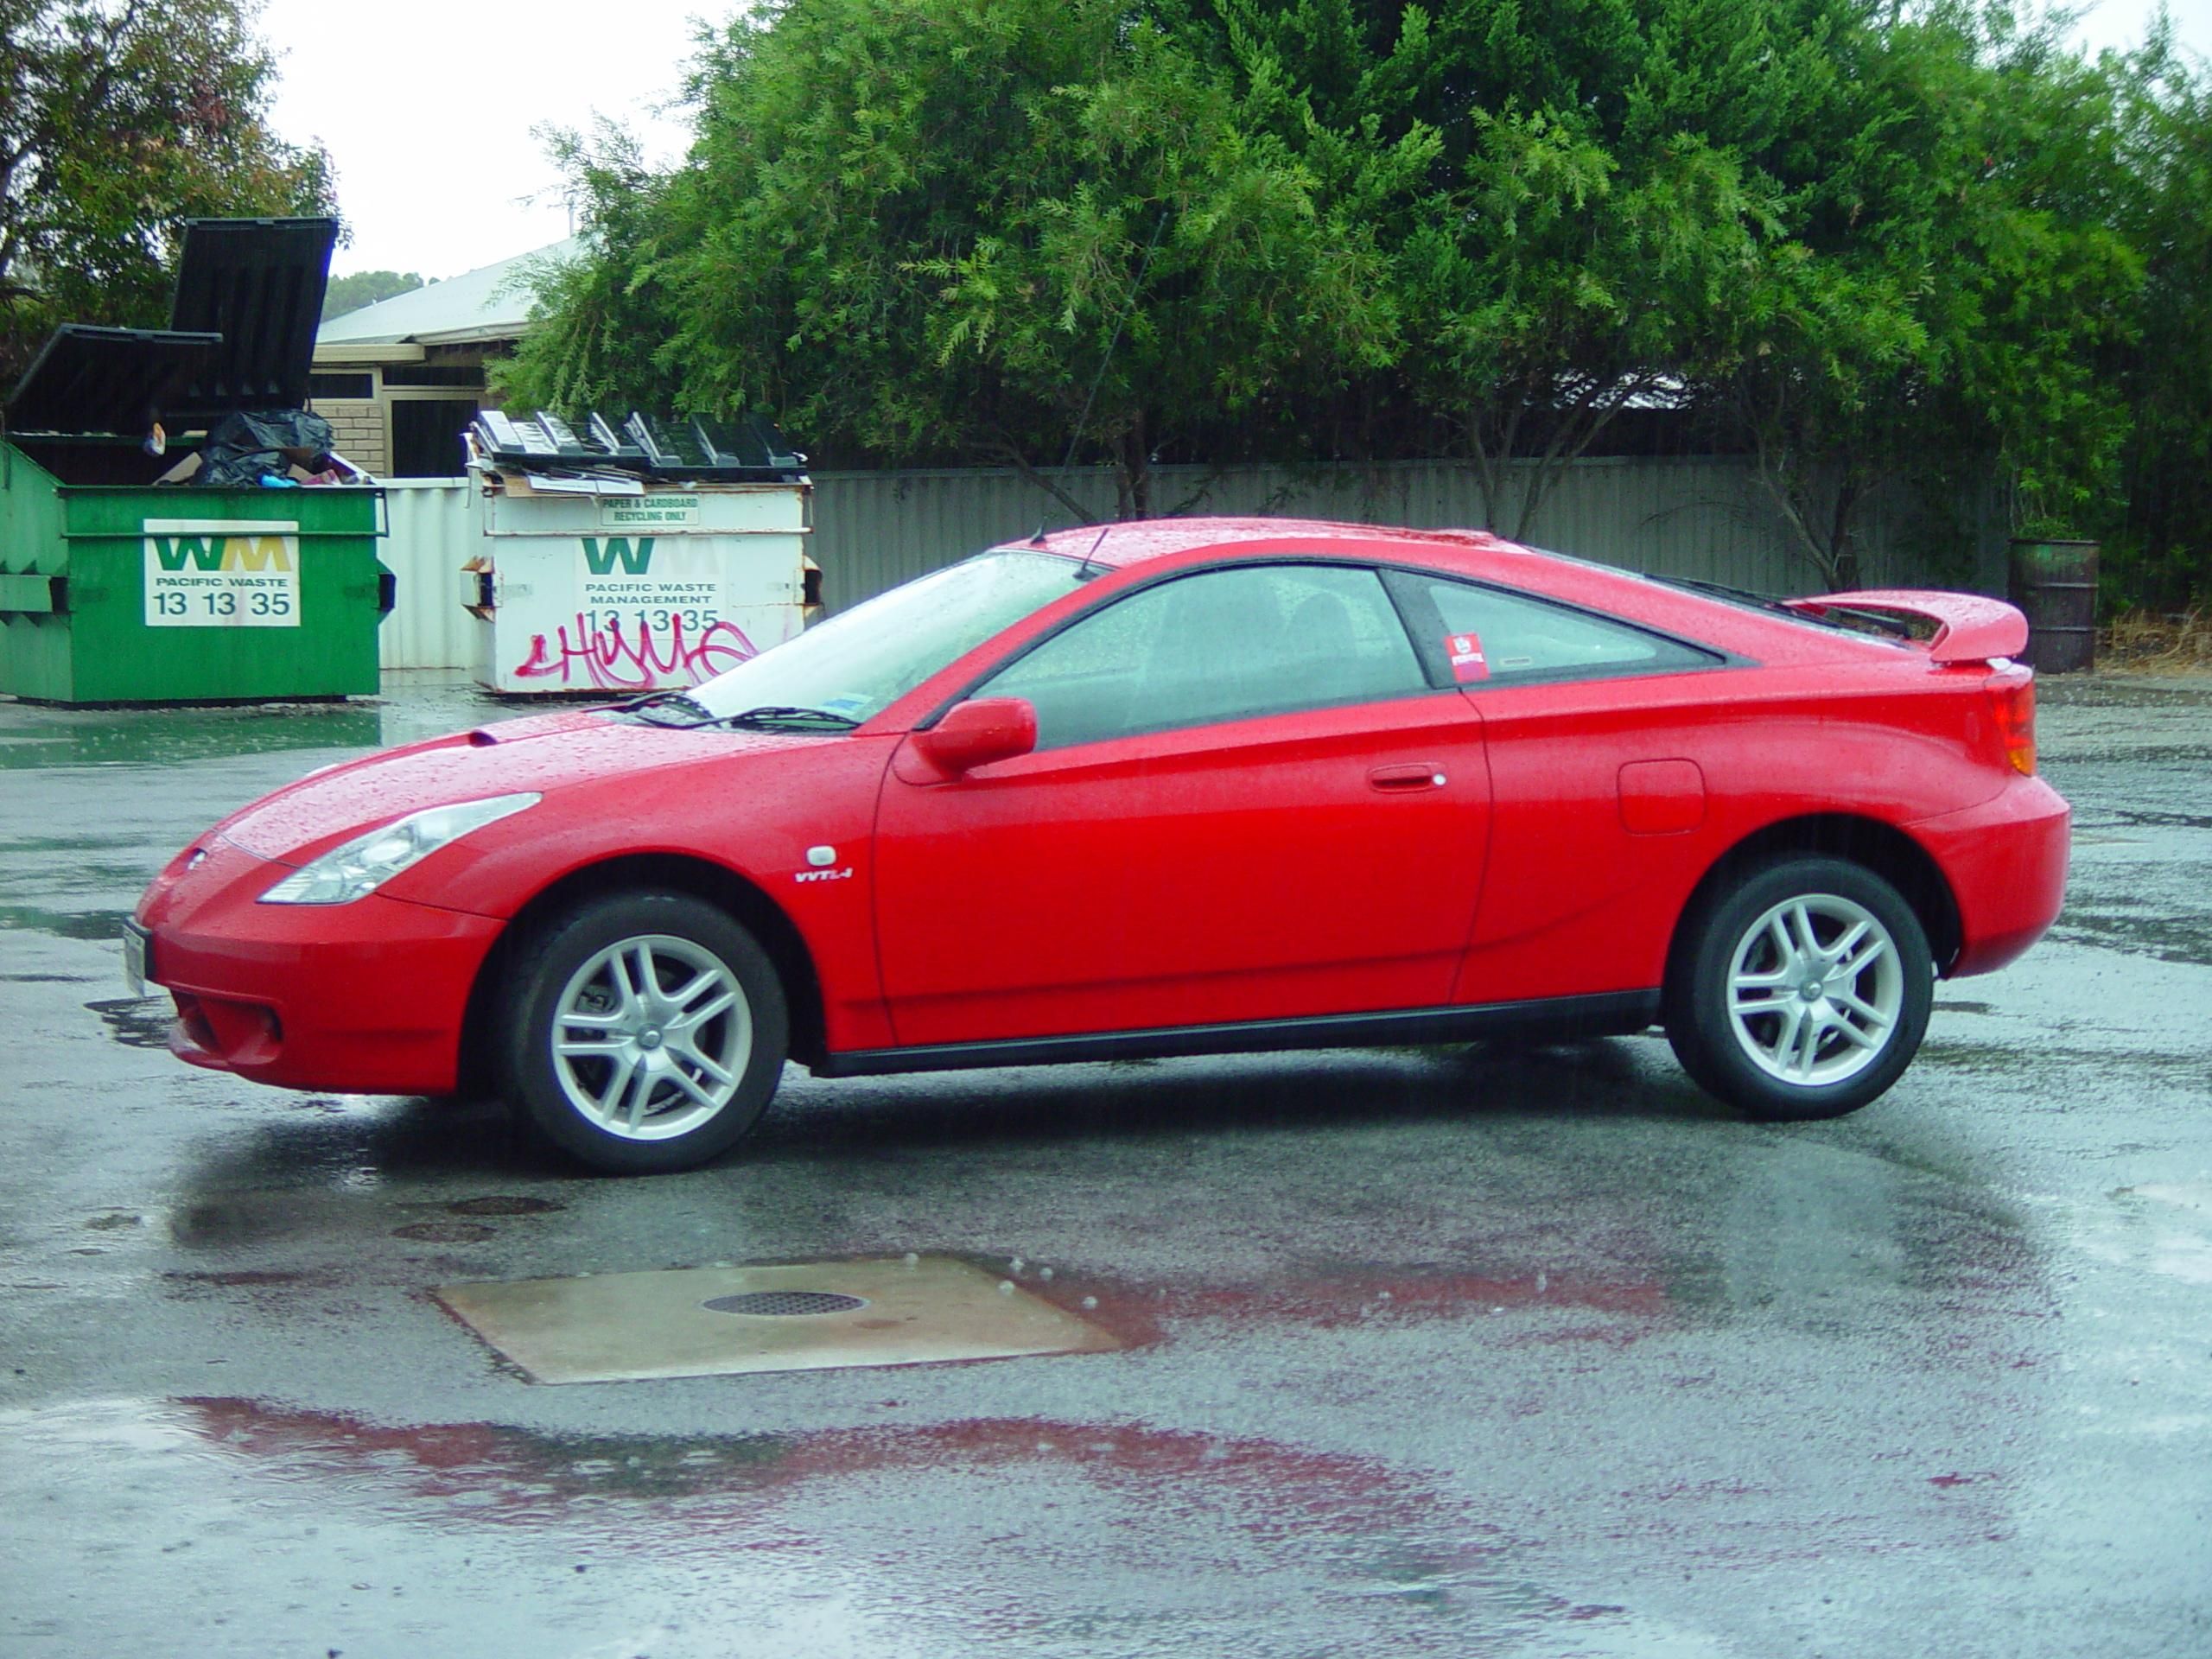 File:Red sports coupe car.jpg - Wikimedia Commons